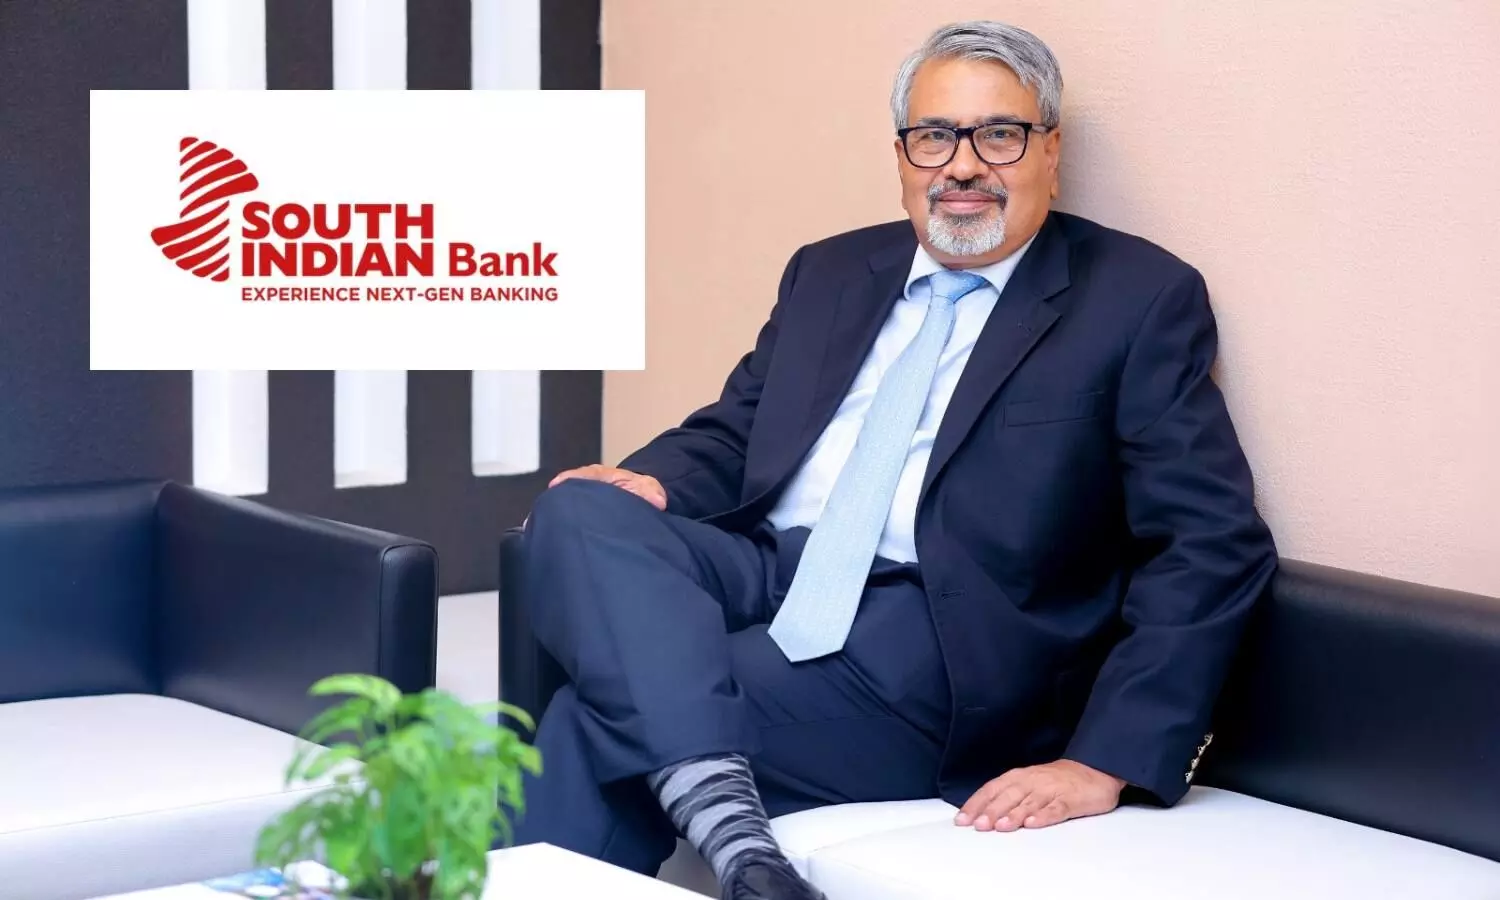 P R Seshadri, MD & CEO of South Indian Bank